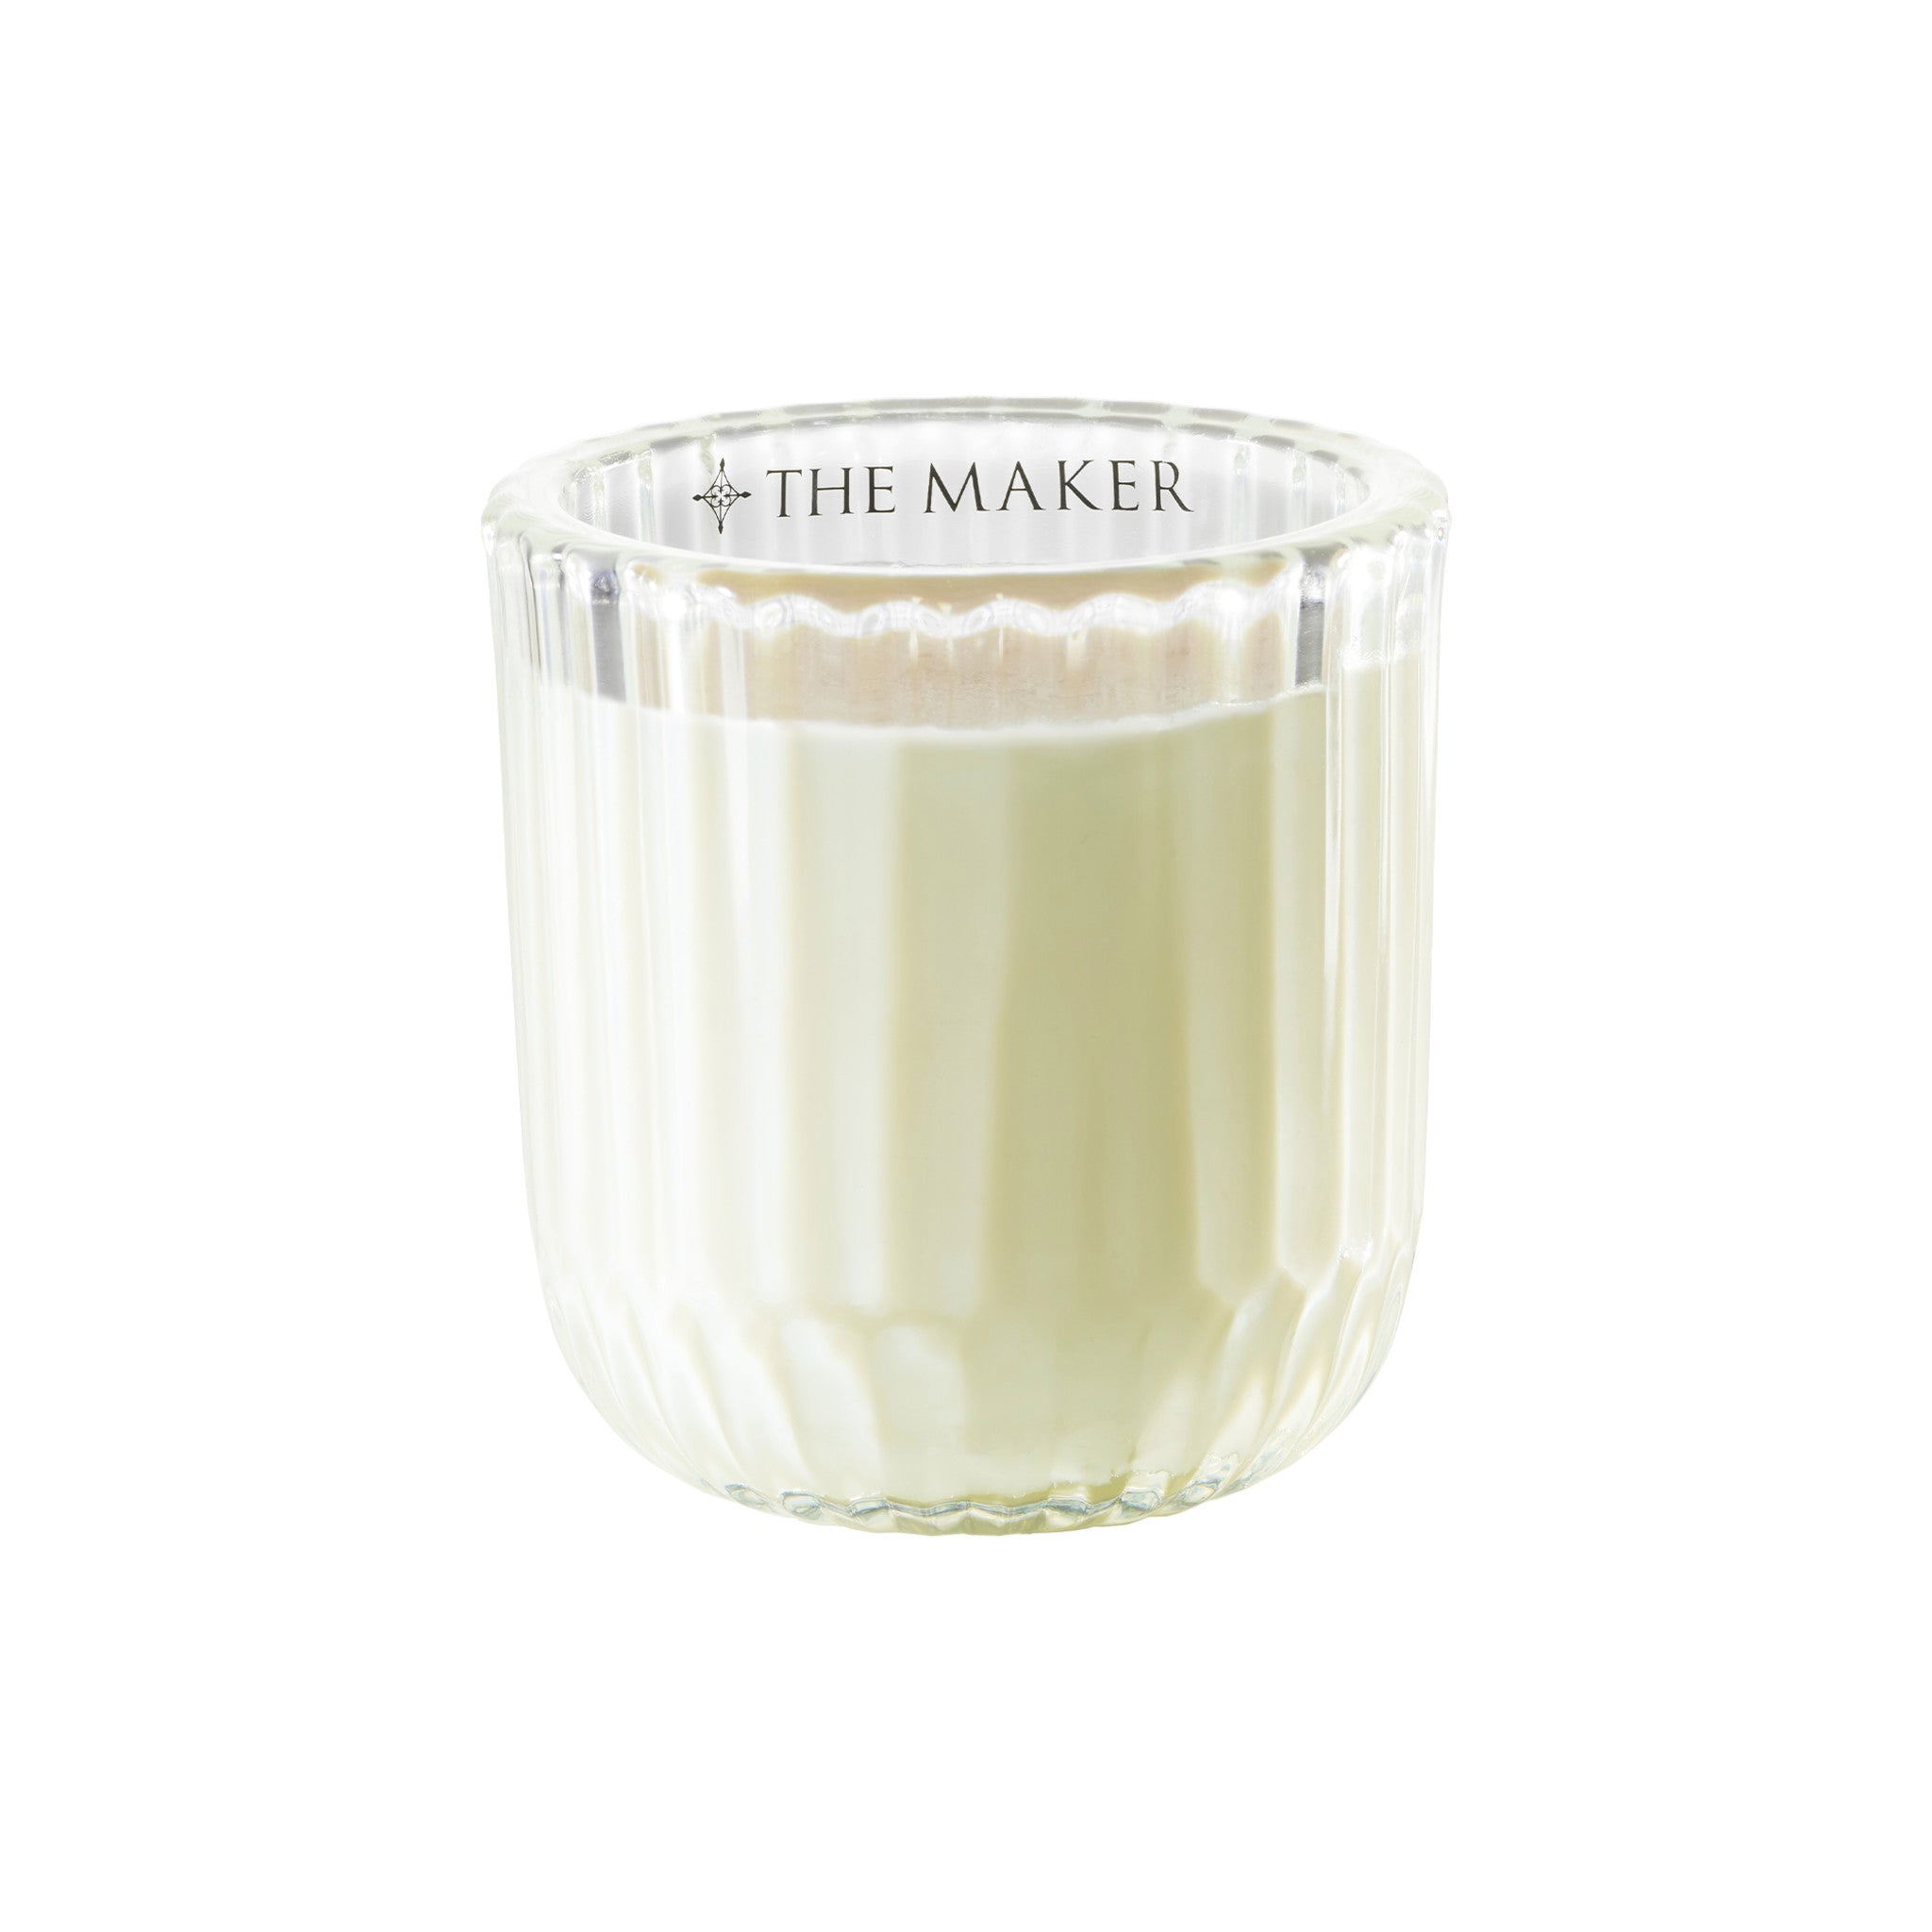 The Maker Gardener Candle main image.